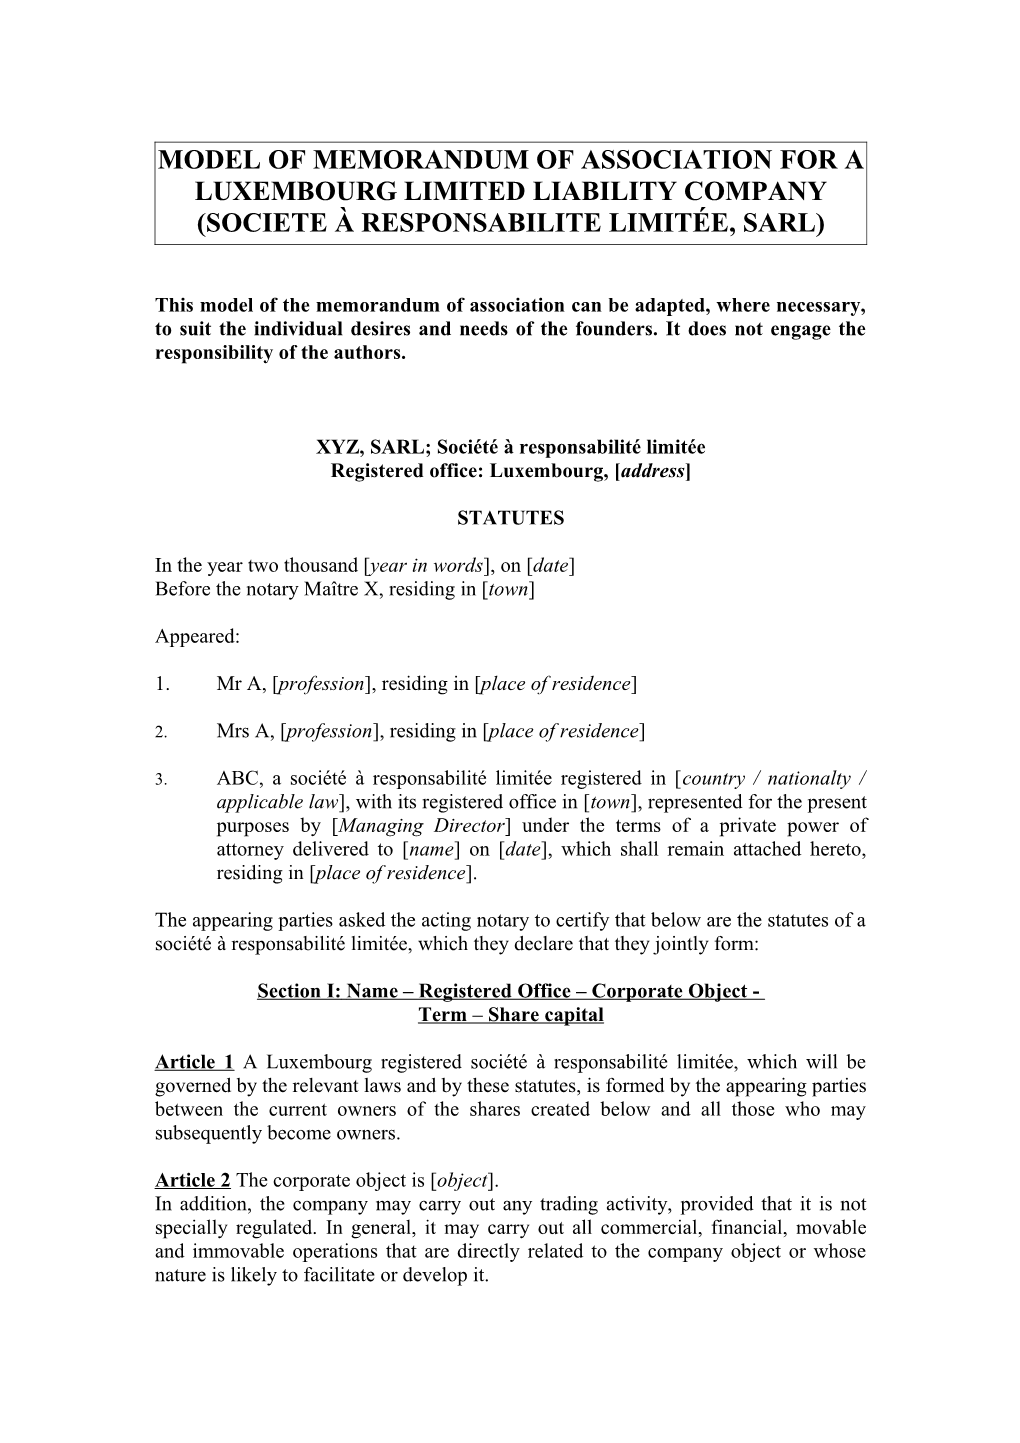 Model of Memorandum of Association for a Luxembourg Limited Liability Company (Societe